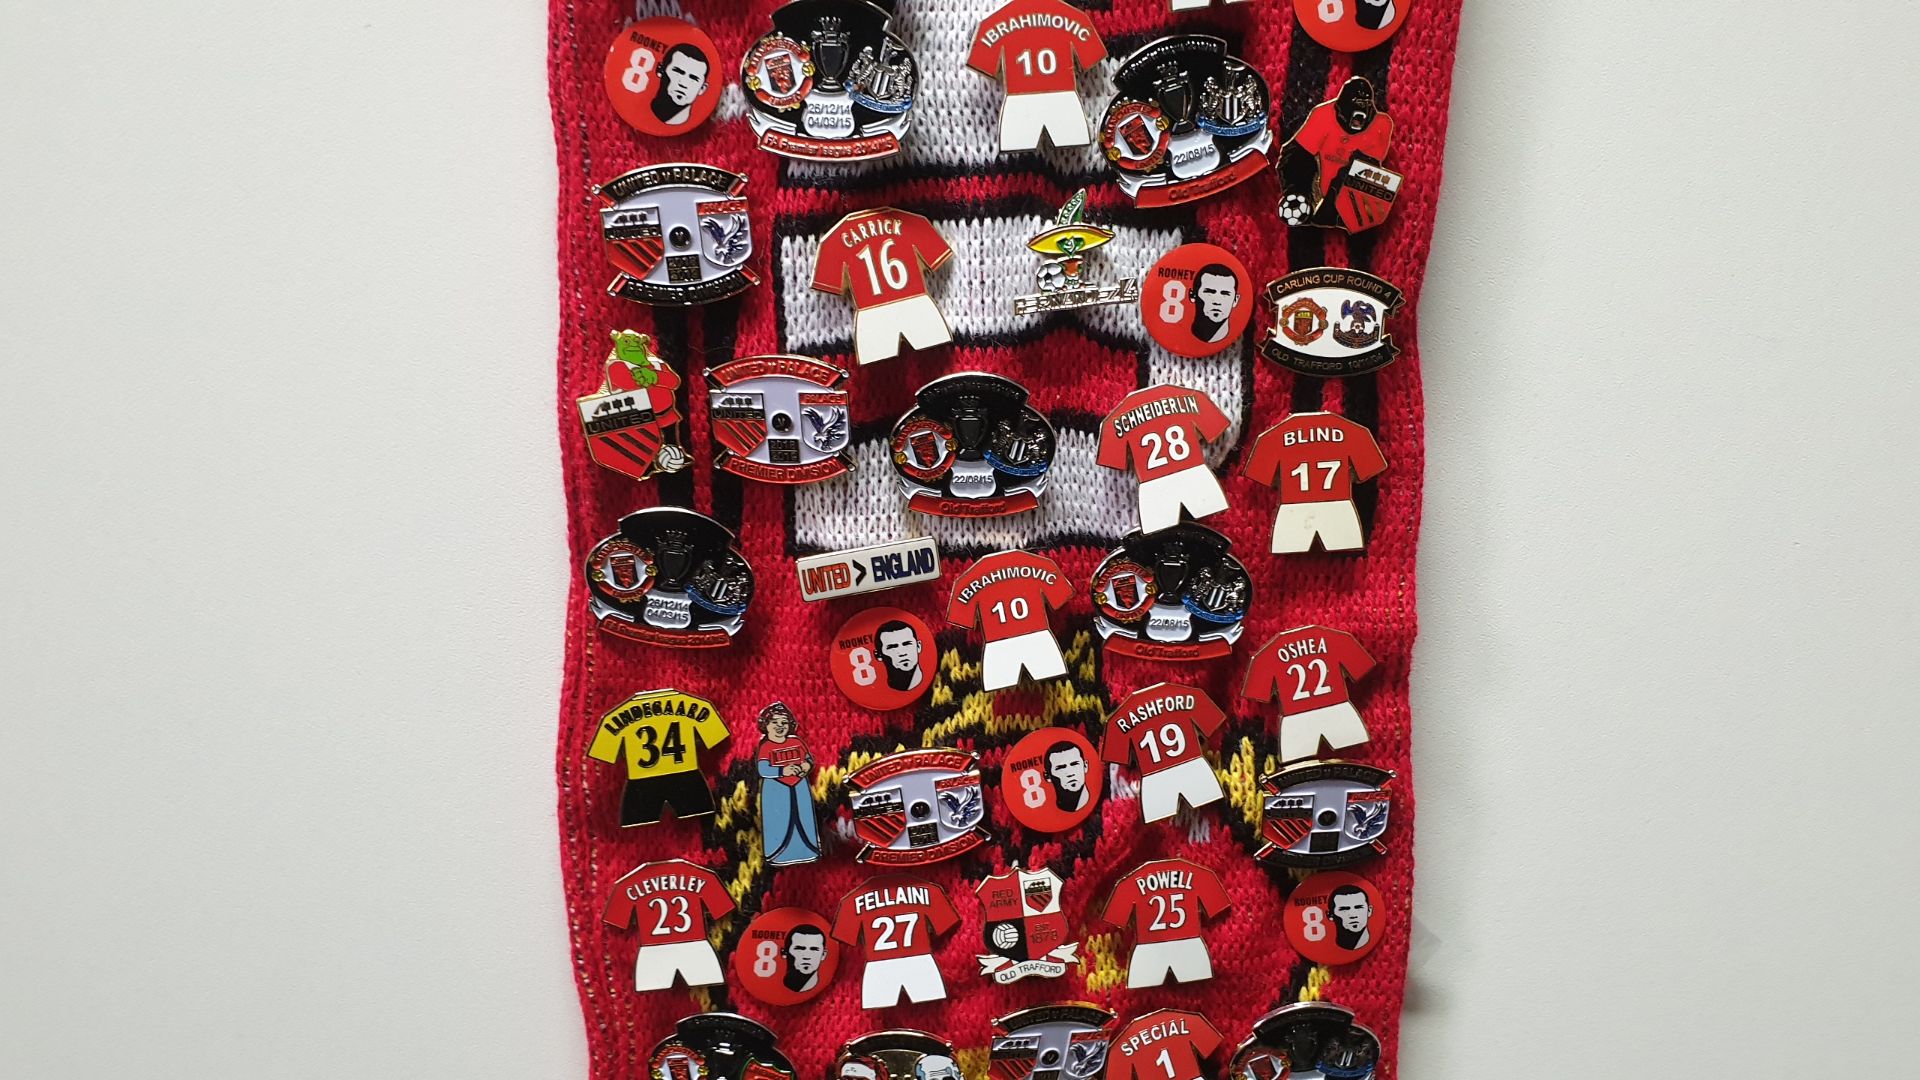 MANCHESTER UNITED SCARF CONTAINING APPROX 200 X PIN BADGES IE MUFC, BATTLE FOR MANCHESTER, ROONEY, - Image 7 of 8